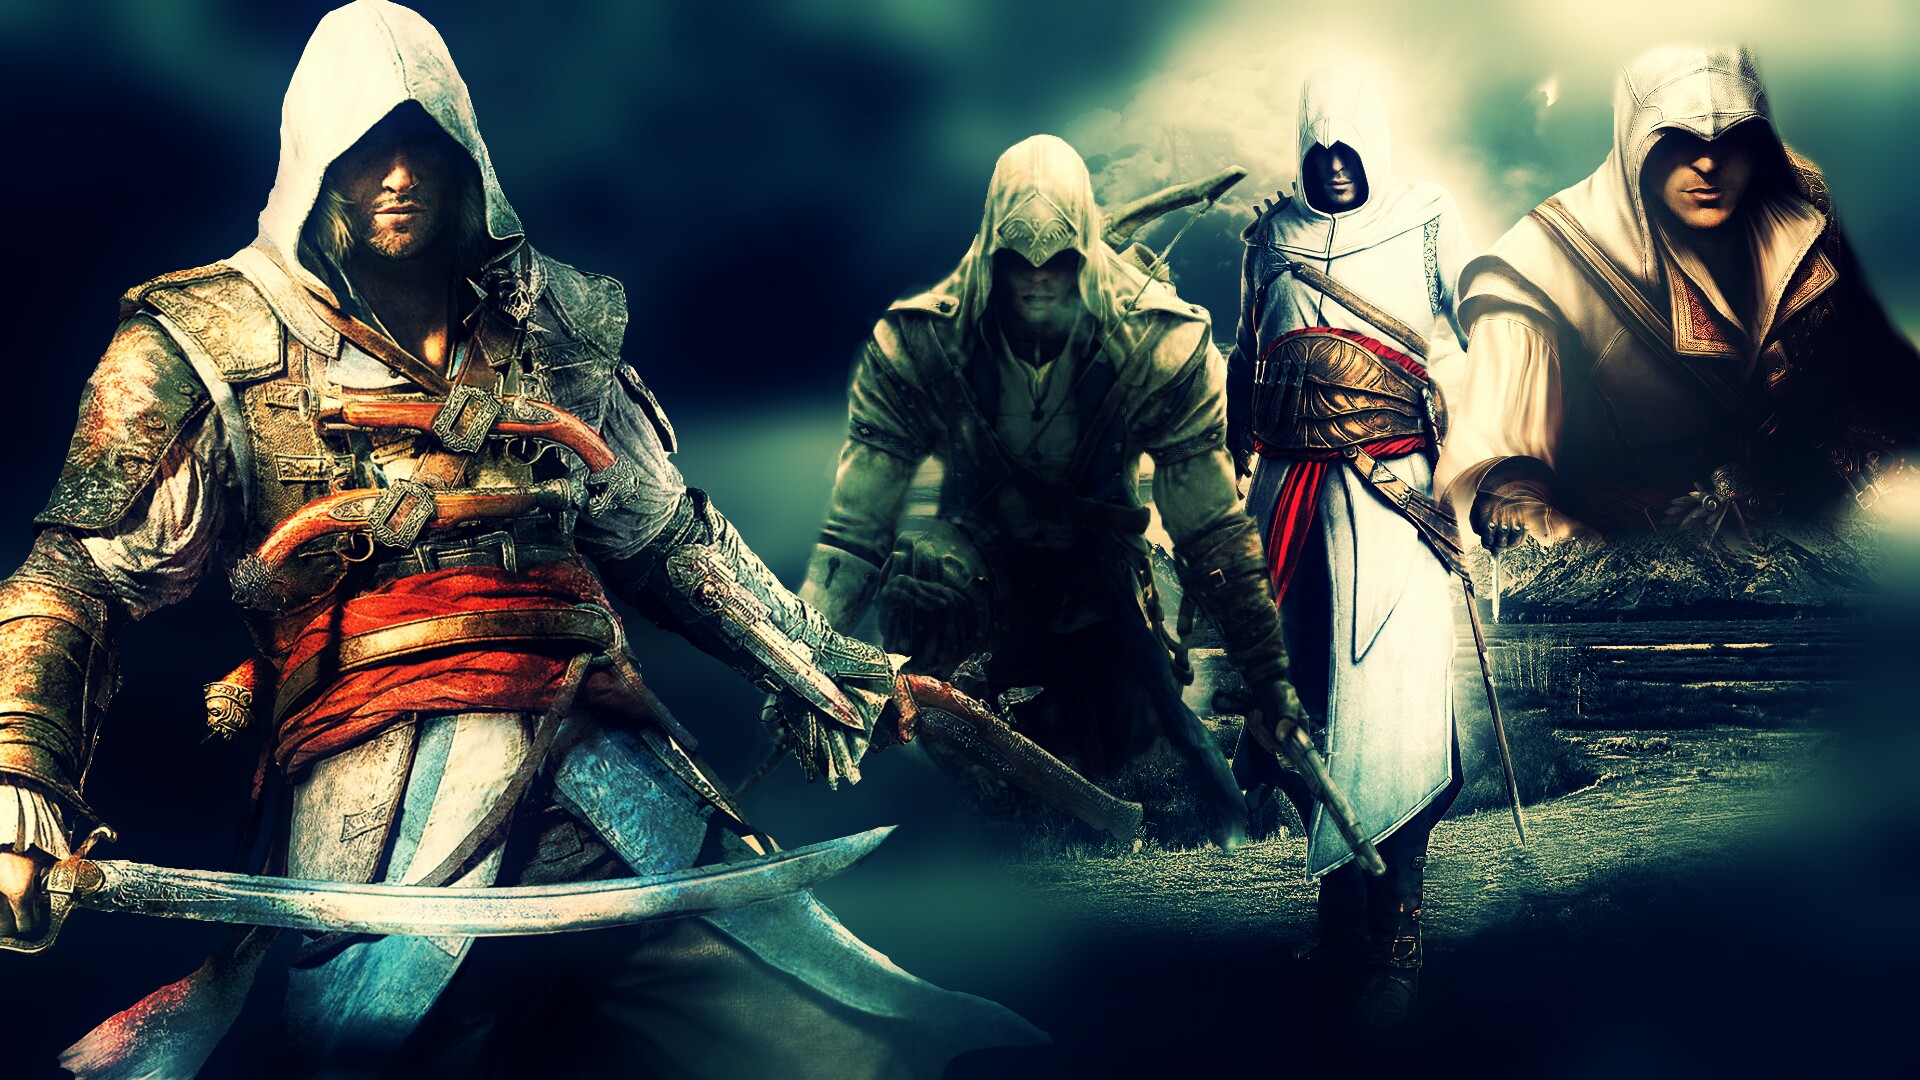 made a custom wallpaper of all the assassins creed protagonists